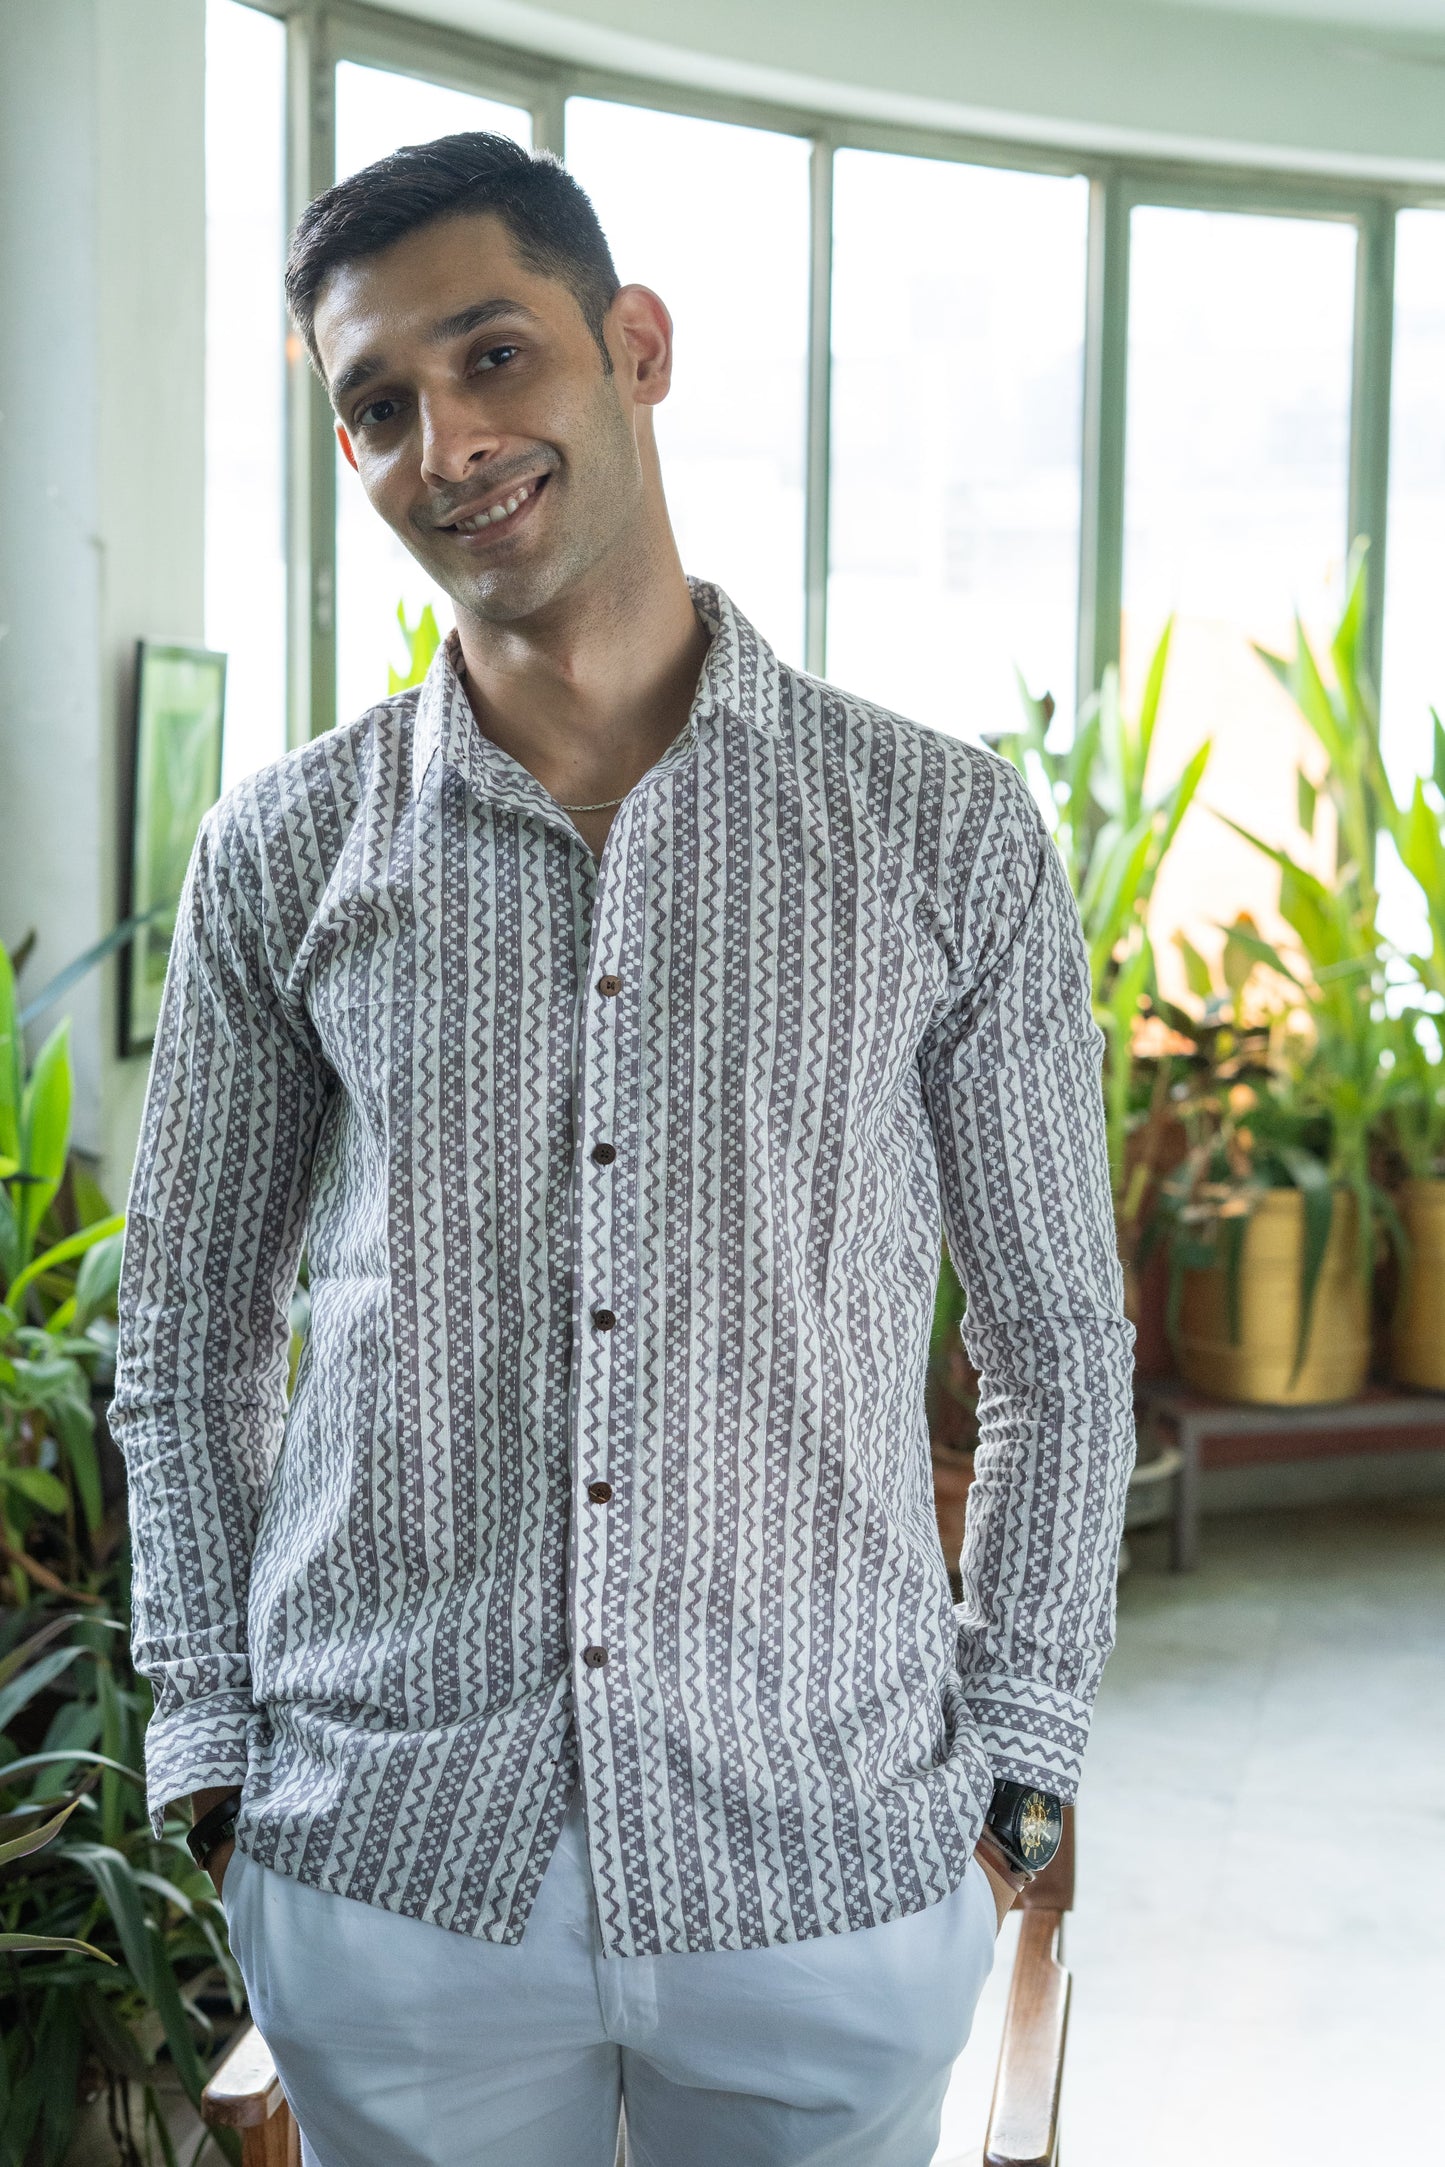 The White Kantha Work Shirt With Striped Tribal Print